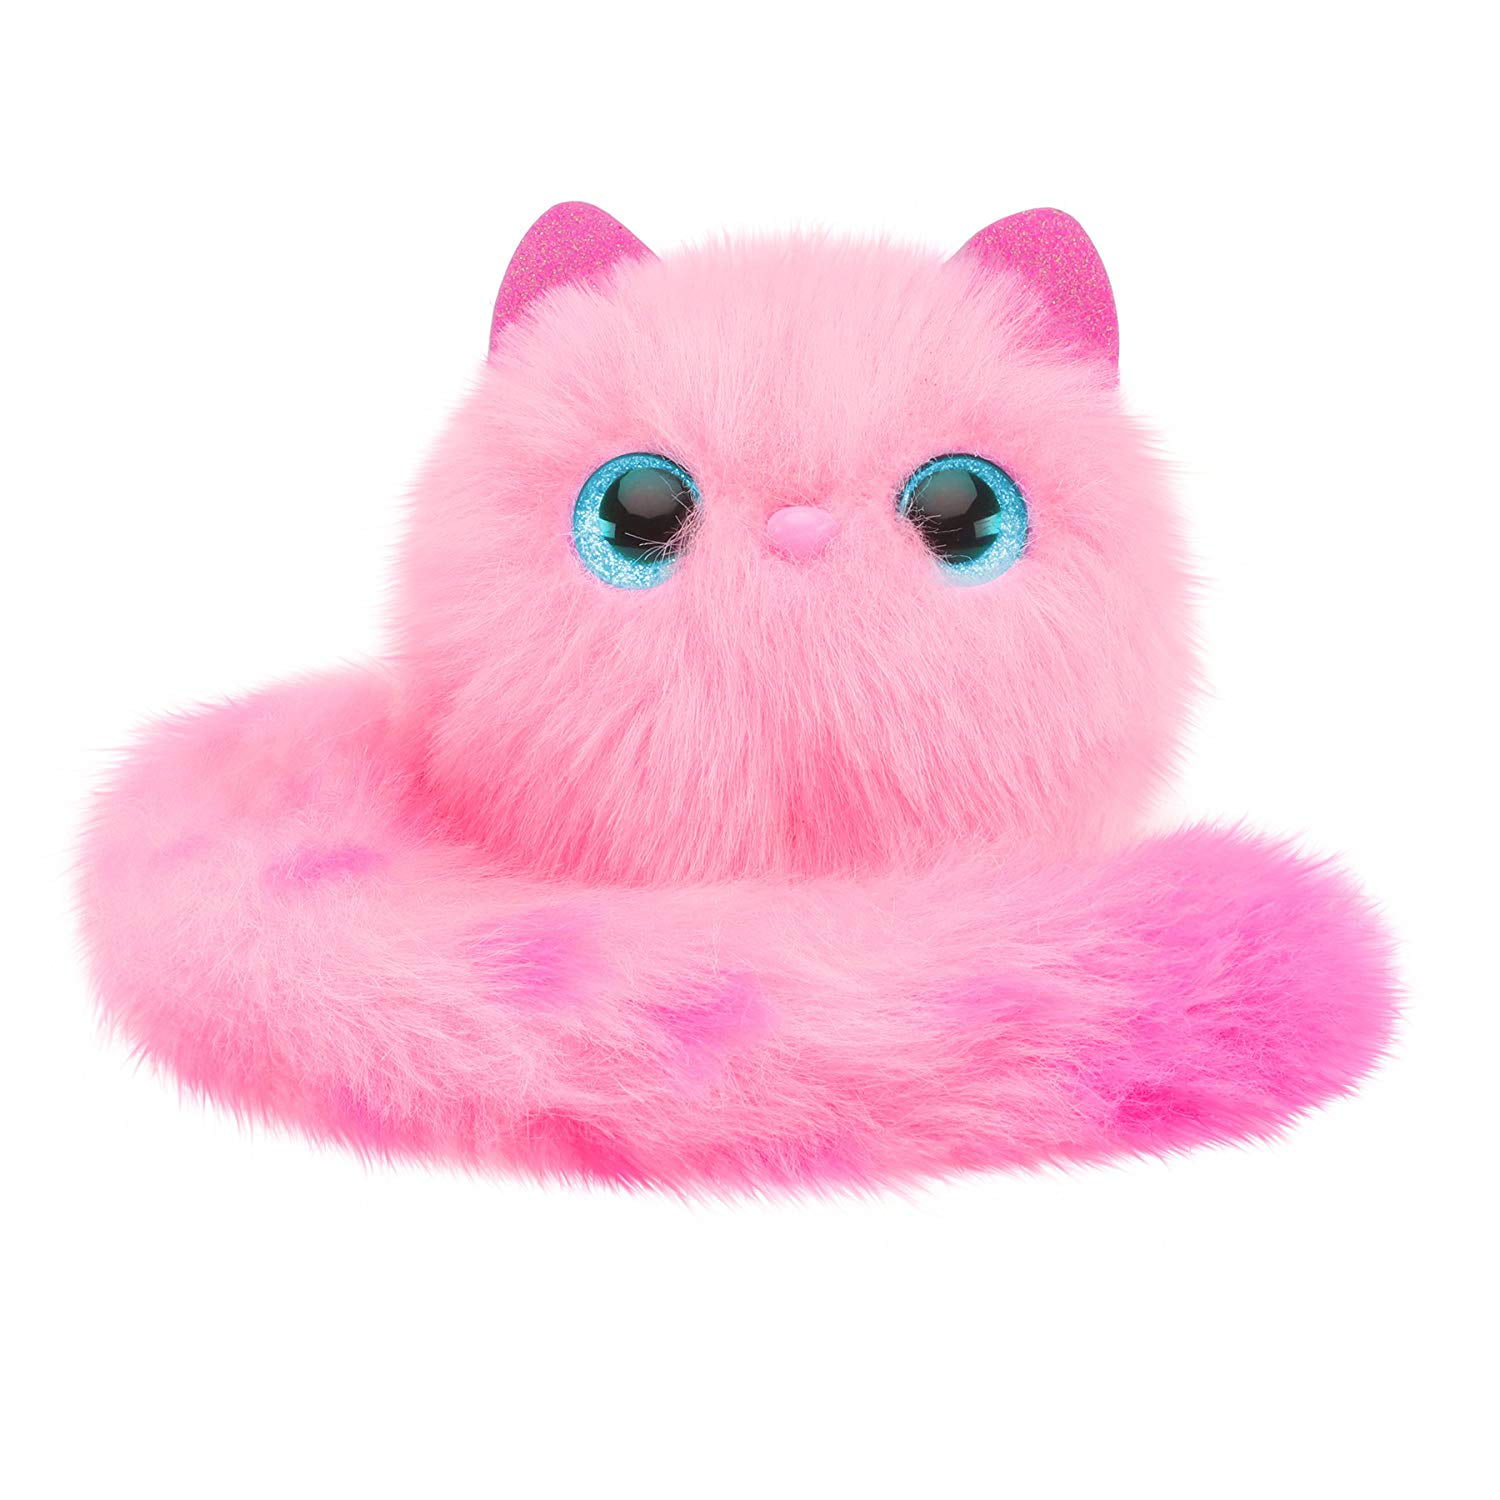 BLOSSOM Pink PLUSH WEARABLE PET CAT with Light Up Eyes & Sounds REAL POMSIES 